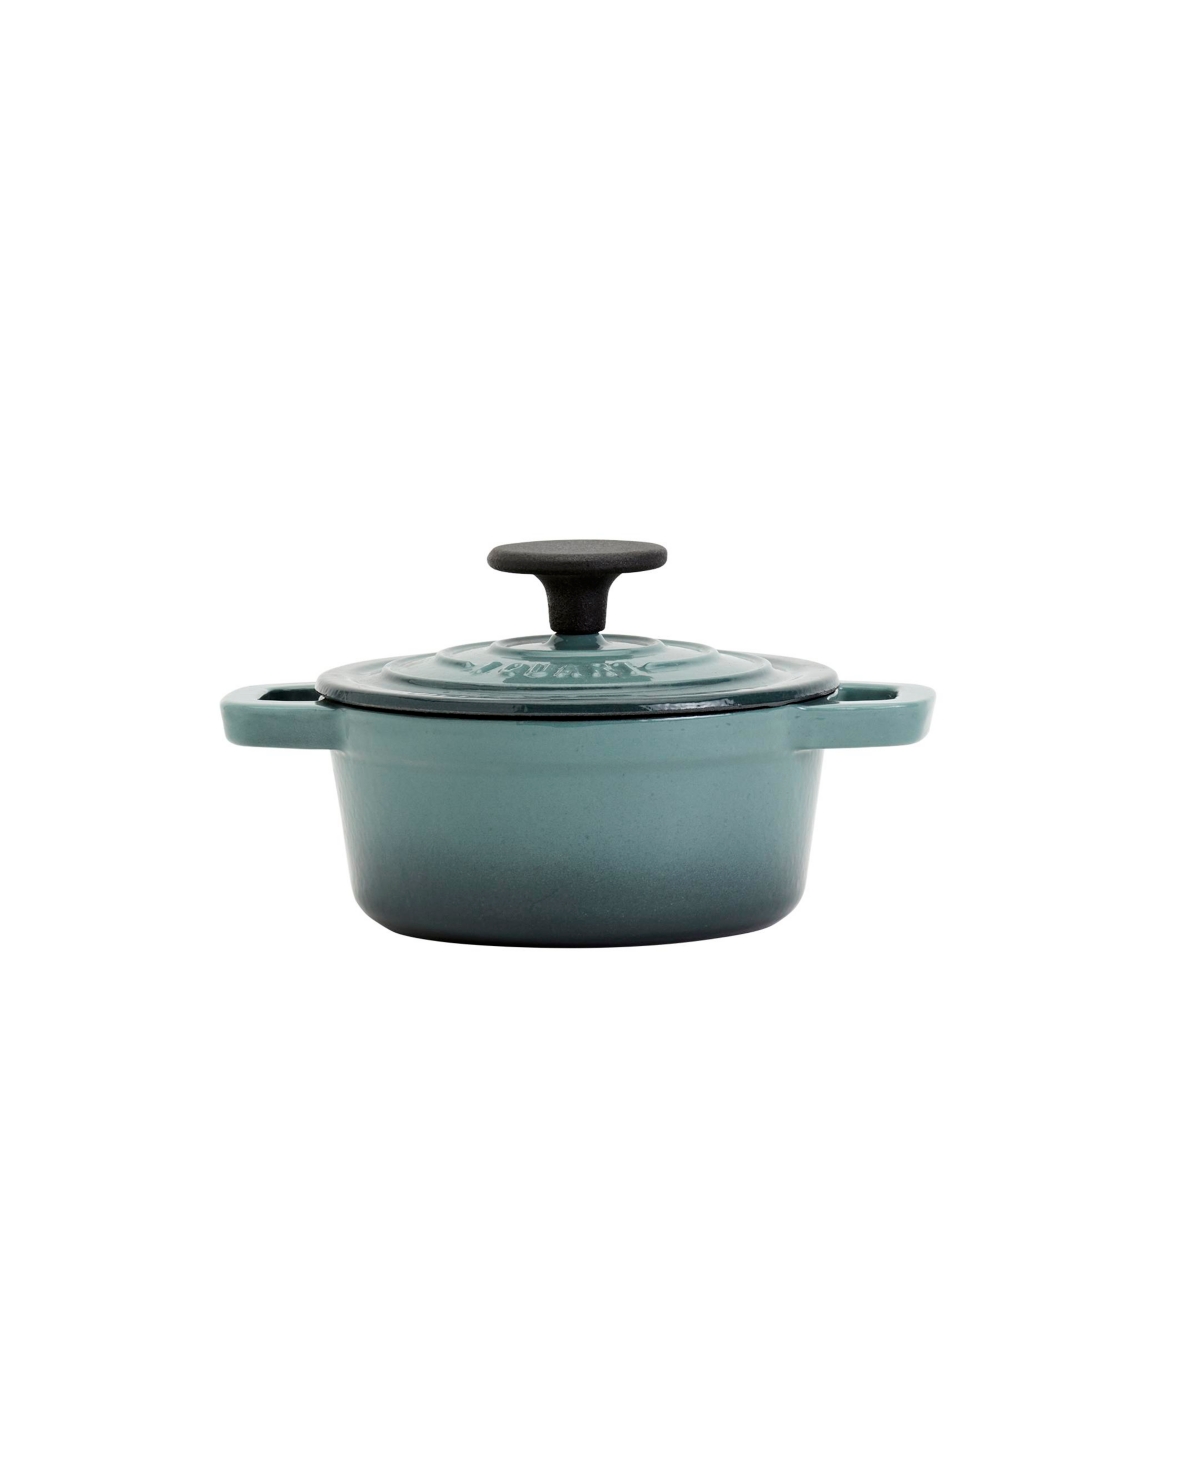 Smith And Clark Cast Iron 1 Piece Quart Round Enamel Dutch Oven In Teal